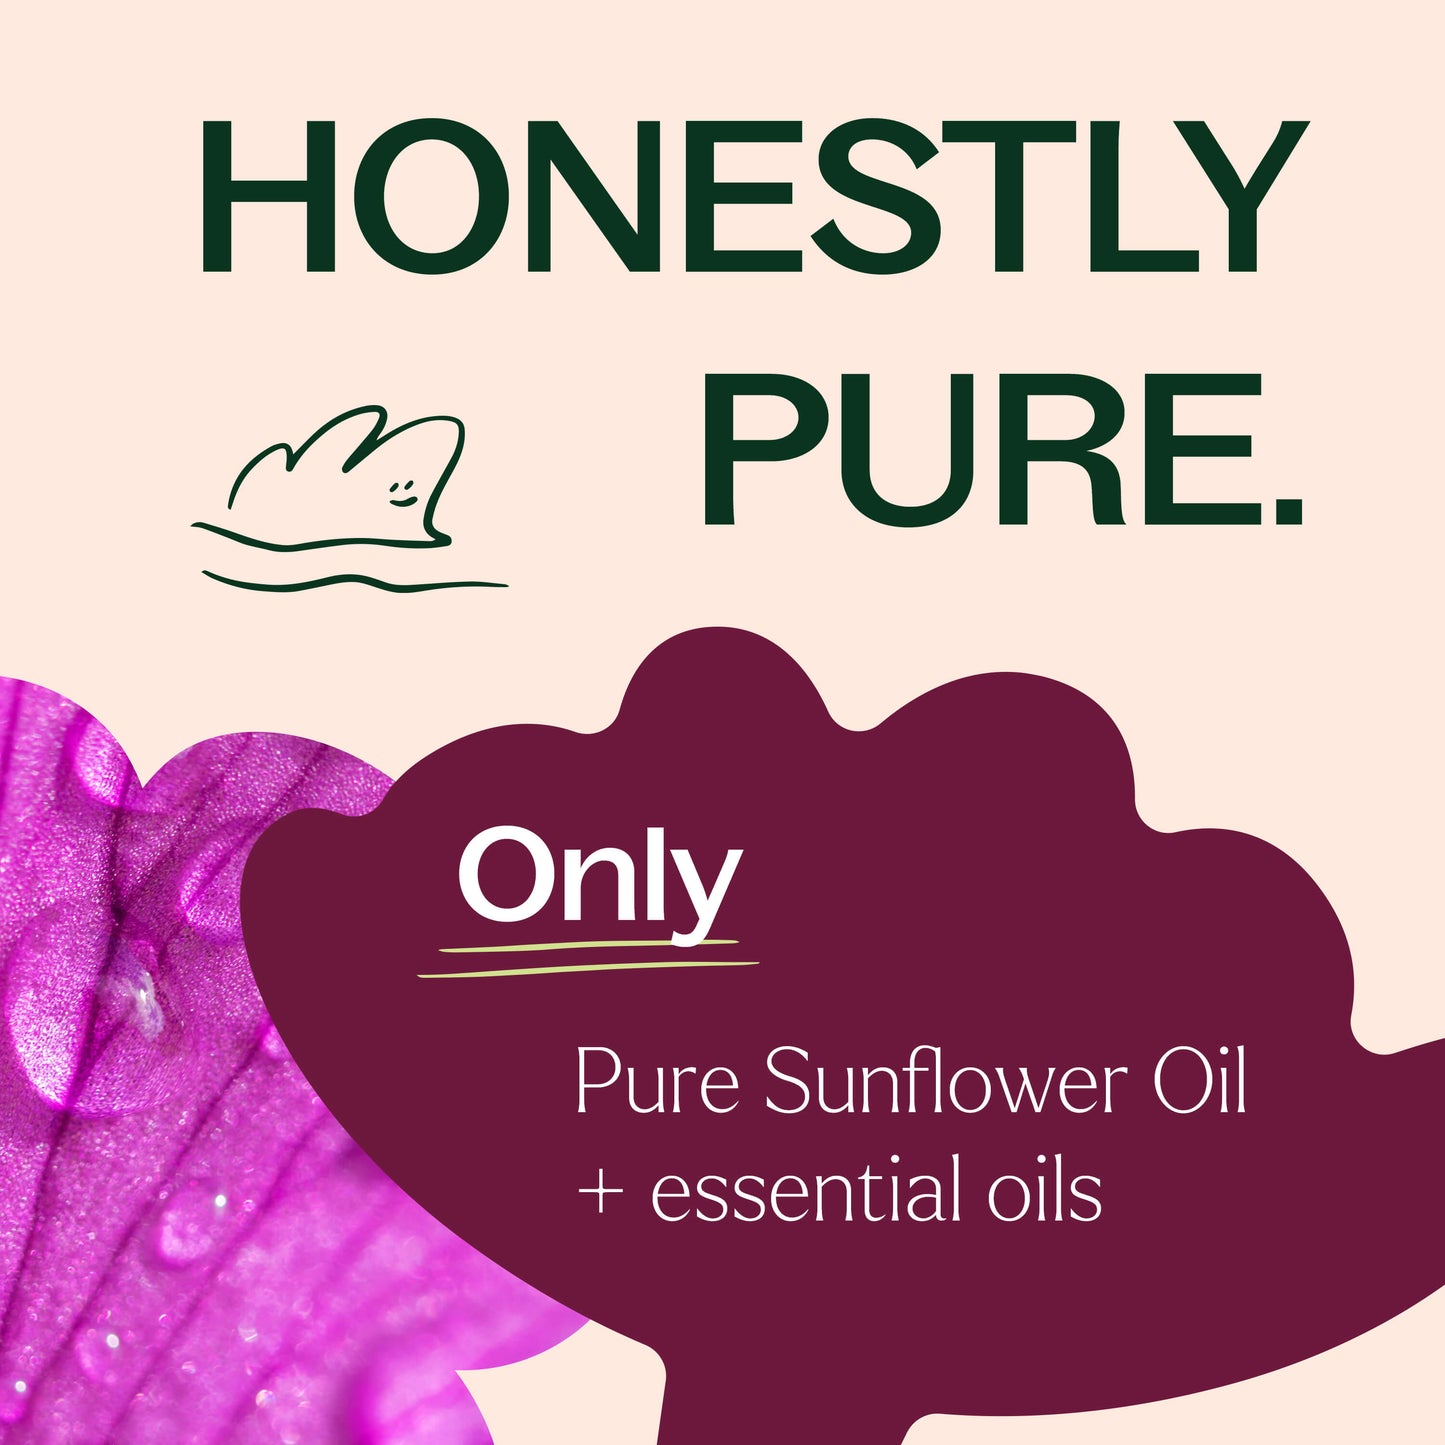 Honestly pure. Only Pure Sunflower Oil + essential oils